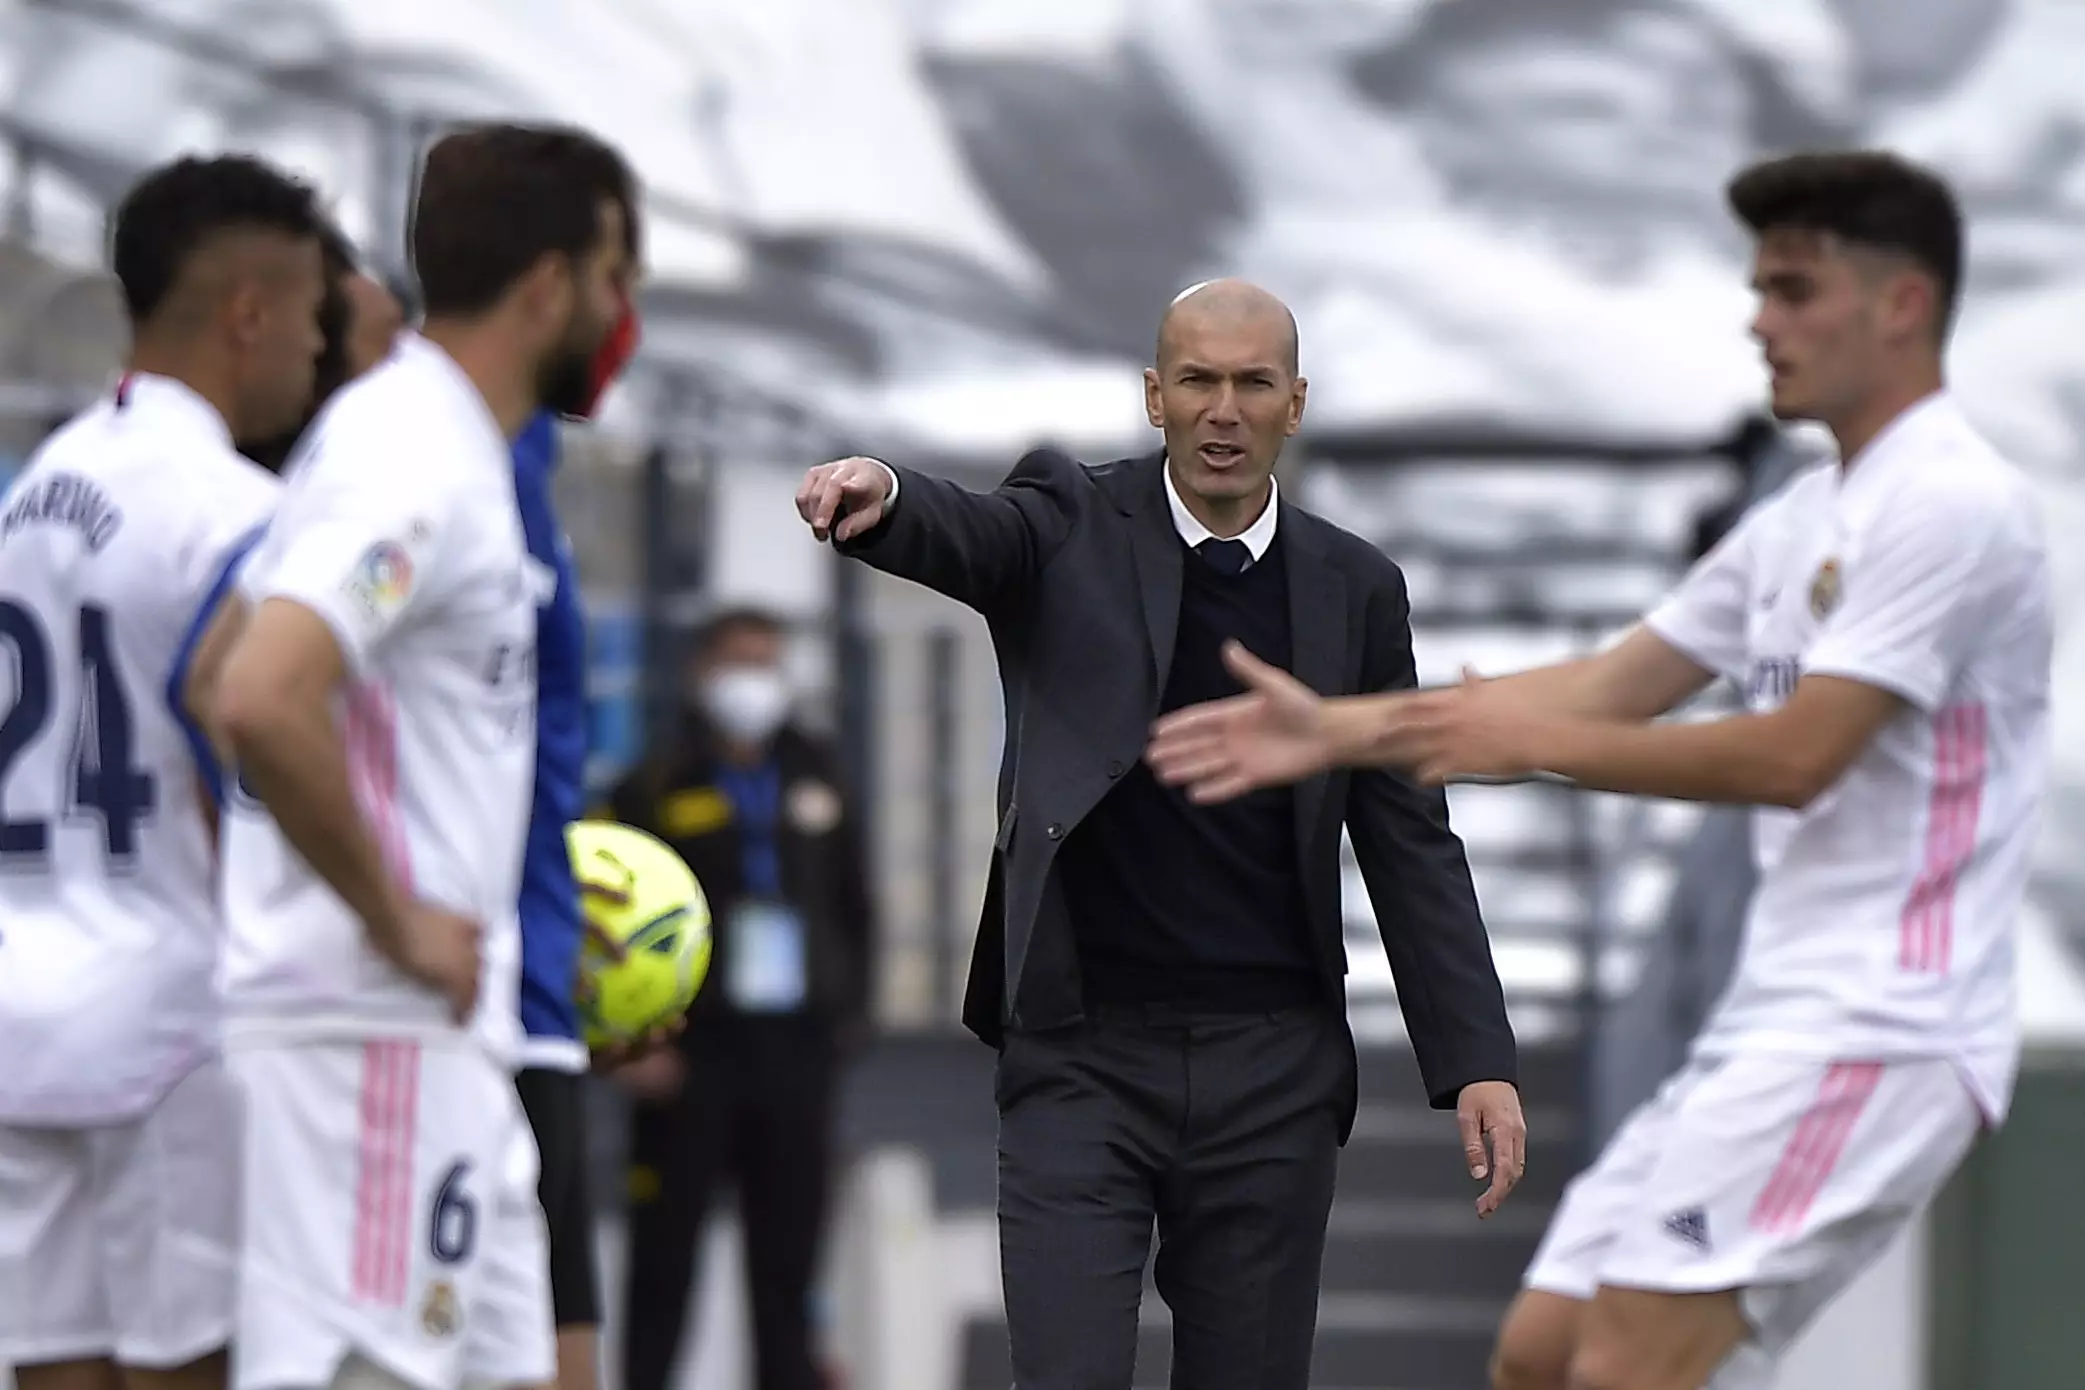 Zidane clearly doesn't feel he was treated fairly. Image: PA Images